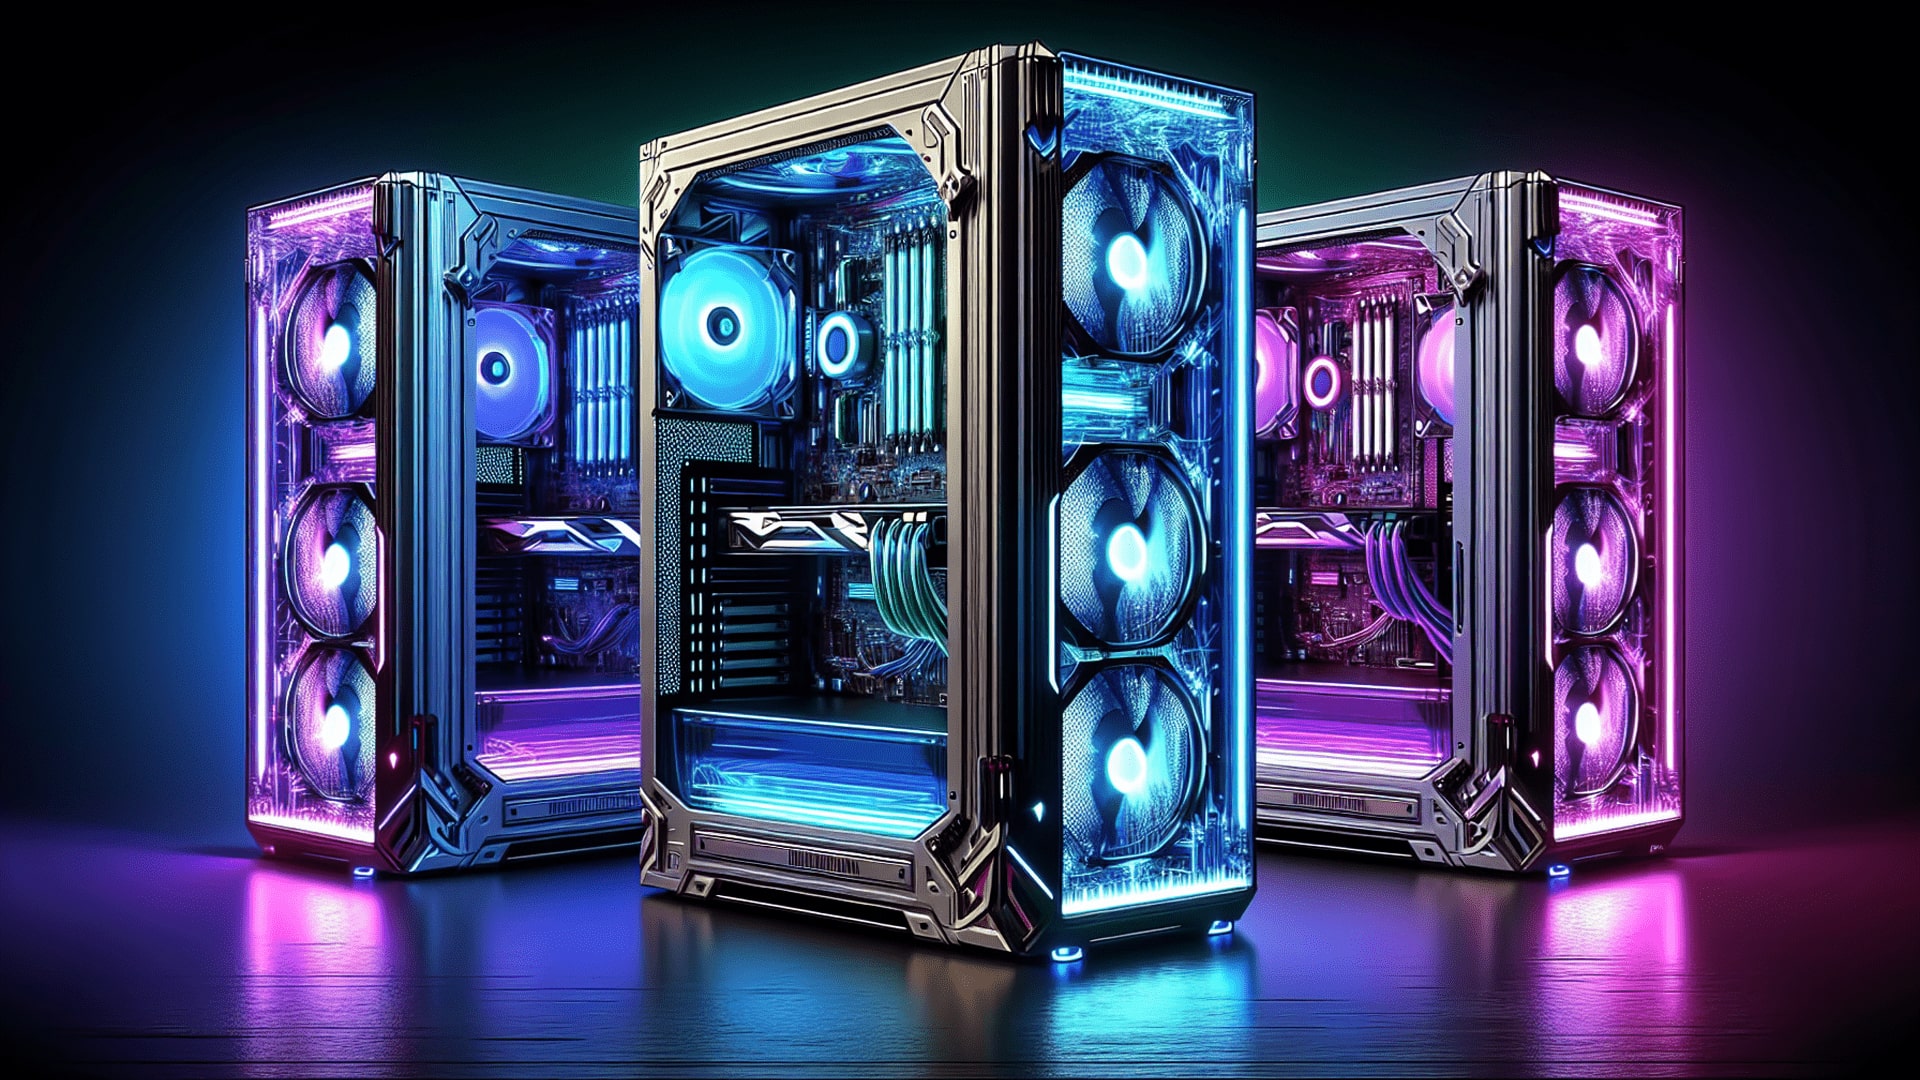 Stylish gaming PCs with high-performance features which are ideal for PC gaming